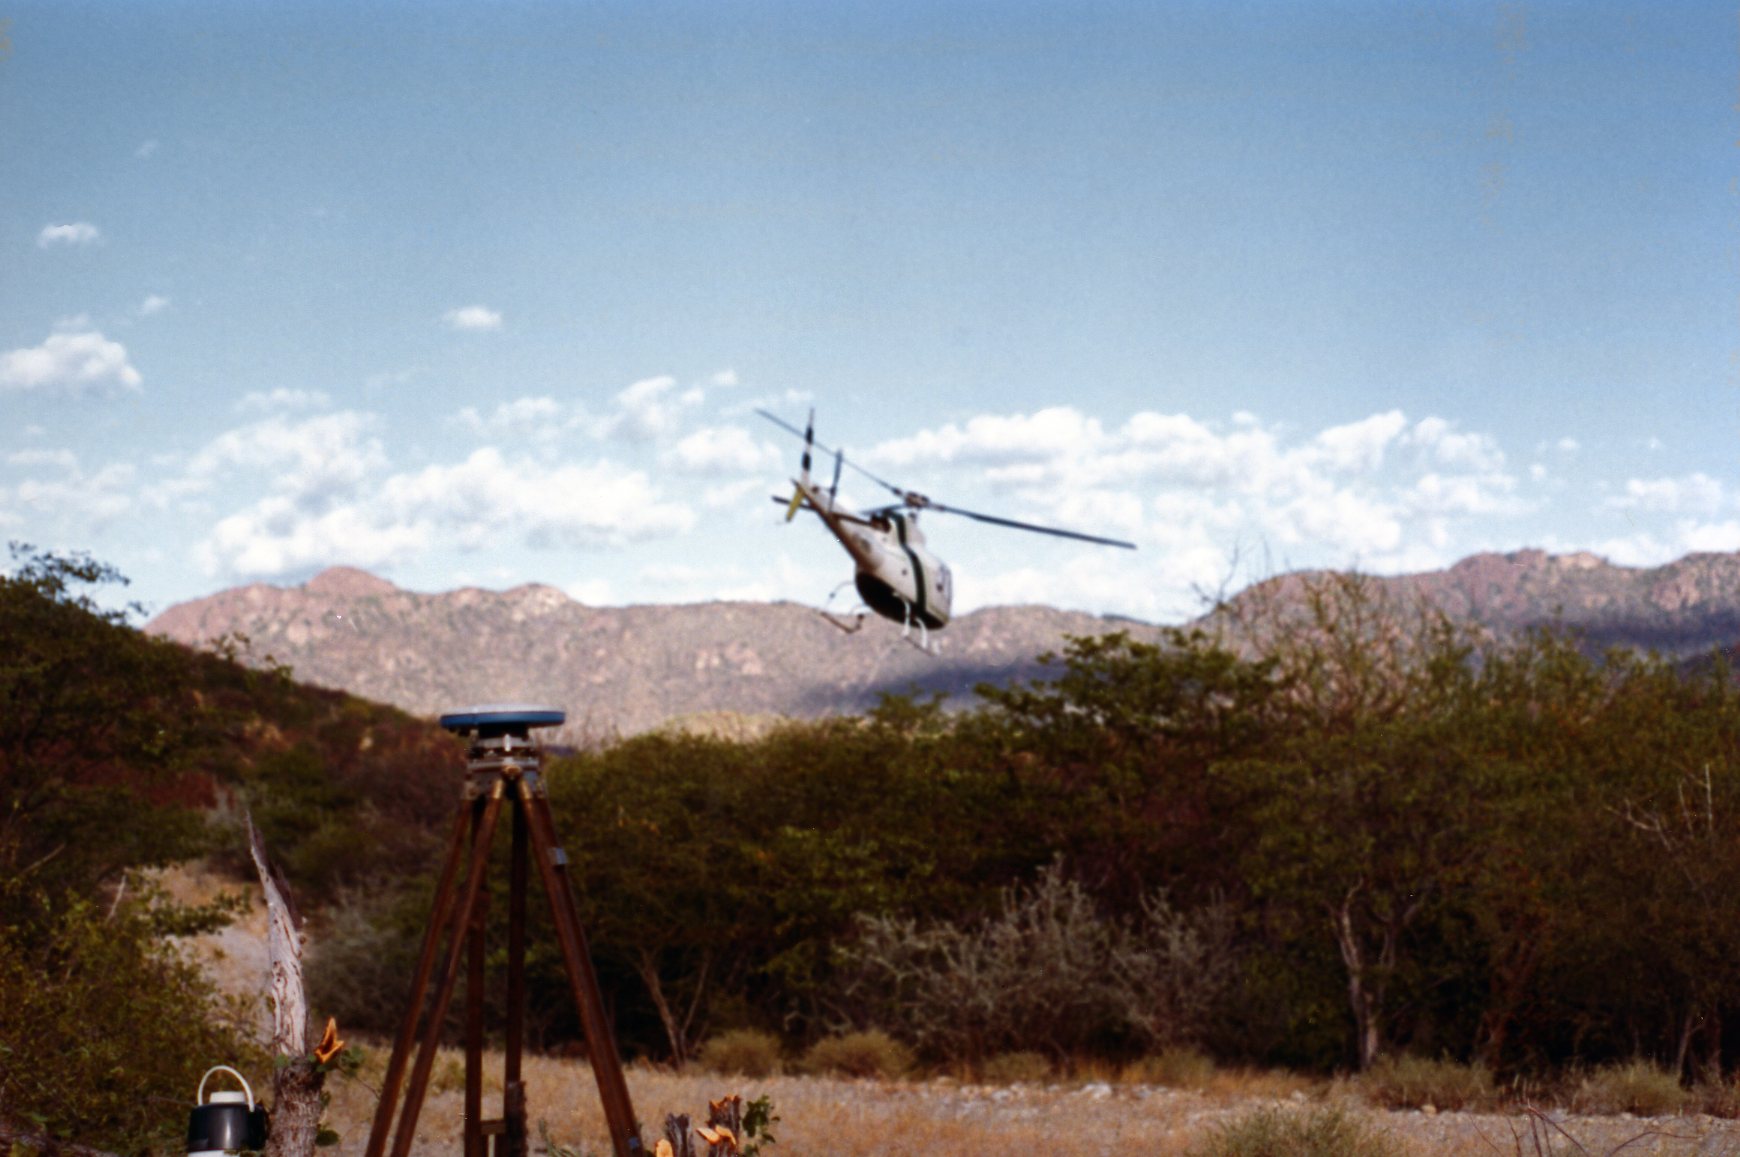 accessing remote areas of Namibia on a survey job using helicopters